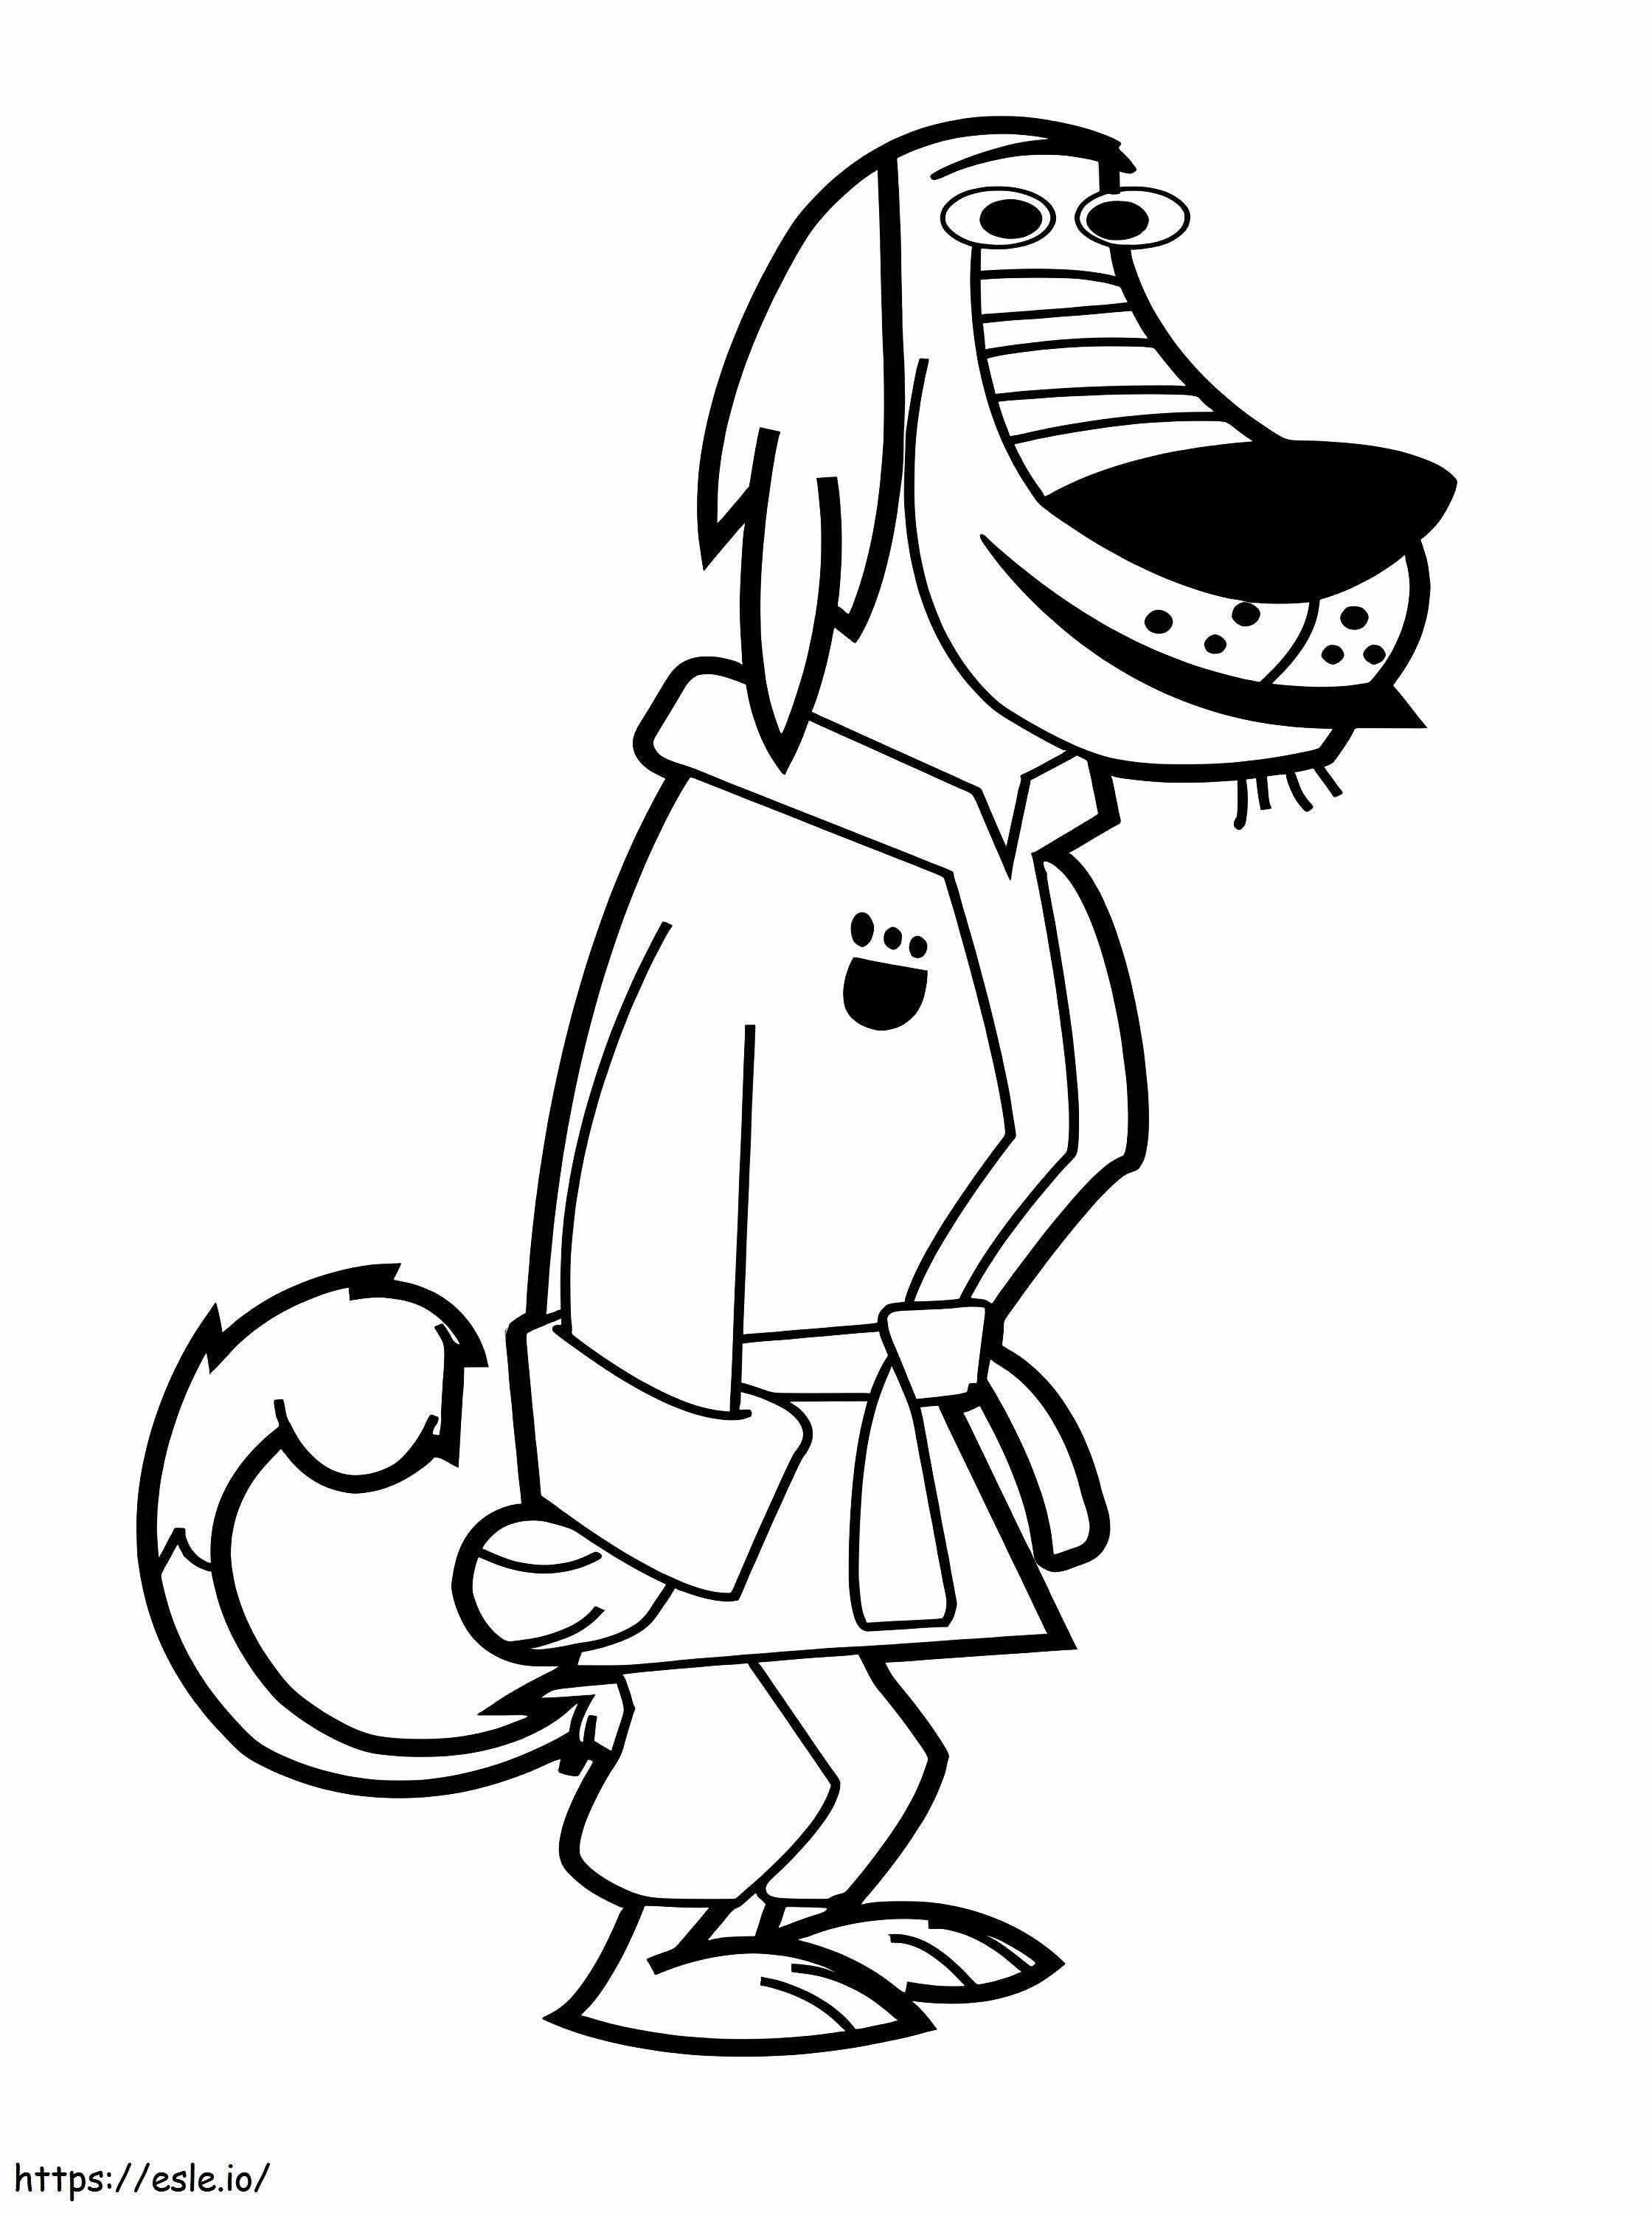 Dukey From Johnny Test coloring page